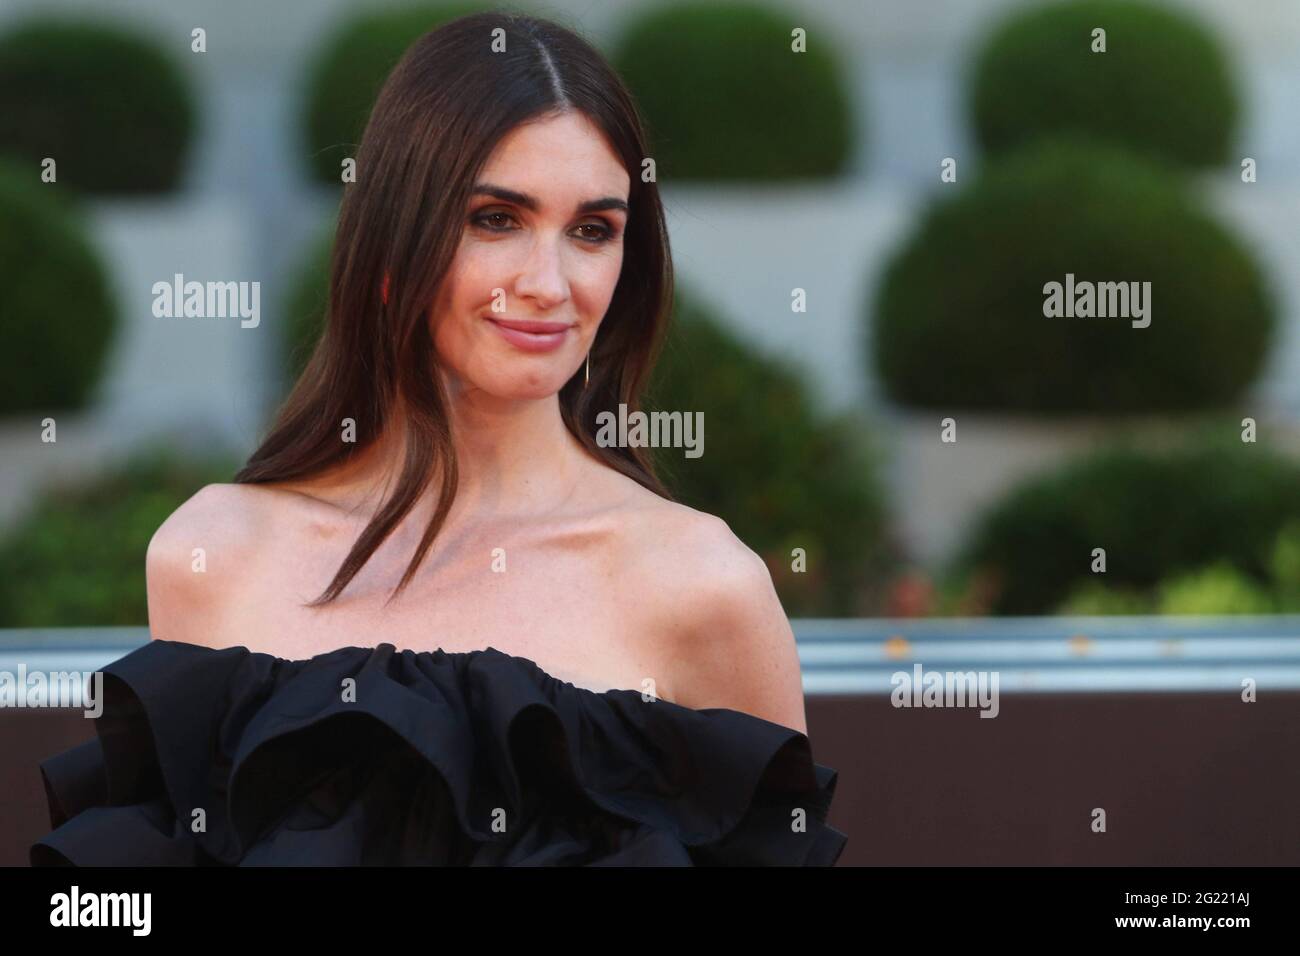 Malaga, Spain. 08th June, 2021. June 7, 2021 (Malaga) Paz Vega, excited by the debut of her daughter Ava in the cinema The actress stars 'La casa del caracol', where also appears her second daughter with Orson Salazar.Paz Vega has attended the press presentation of her new film, directed by the novel Macarena Astorga, and has done so accompanied by her husband and two children Orson and Lenon. Credit: CORDON PRESS/Alamy Live News Stock Photo